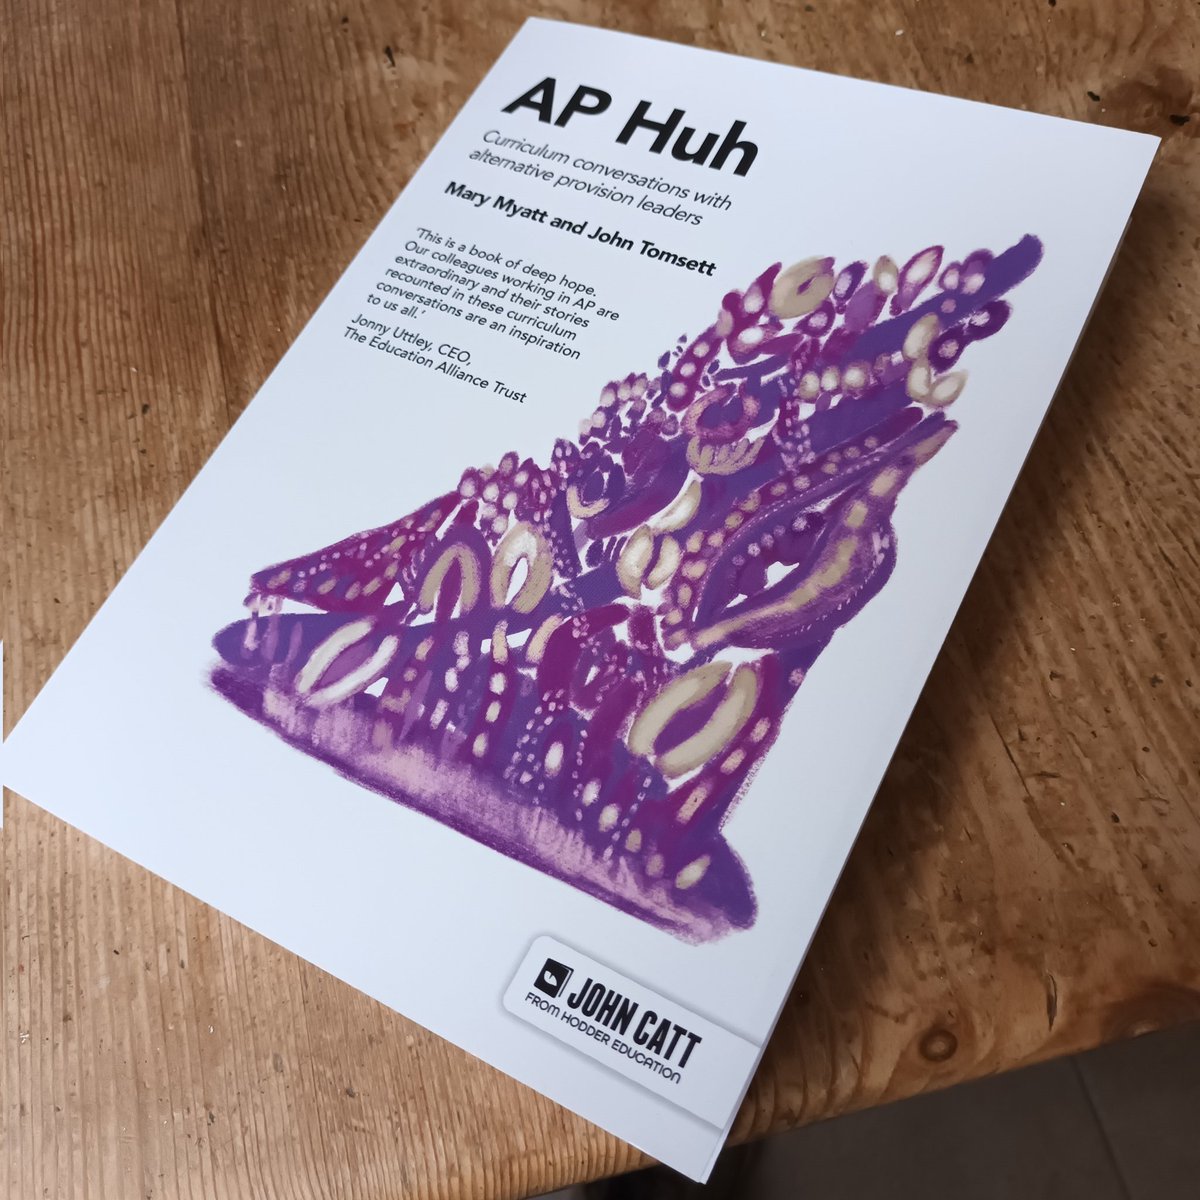 In just over 3 years, our HUH curriculum series is complete @MaryMyatt! With huge thanks to all the 130+ contributors and to @JohnCattEd for believing in the project. Pre-order AP Huh here: amzn.eu/d/eBLIyAt